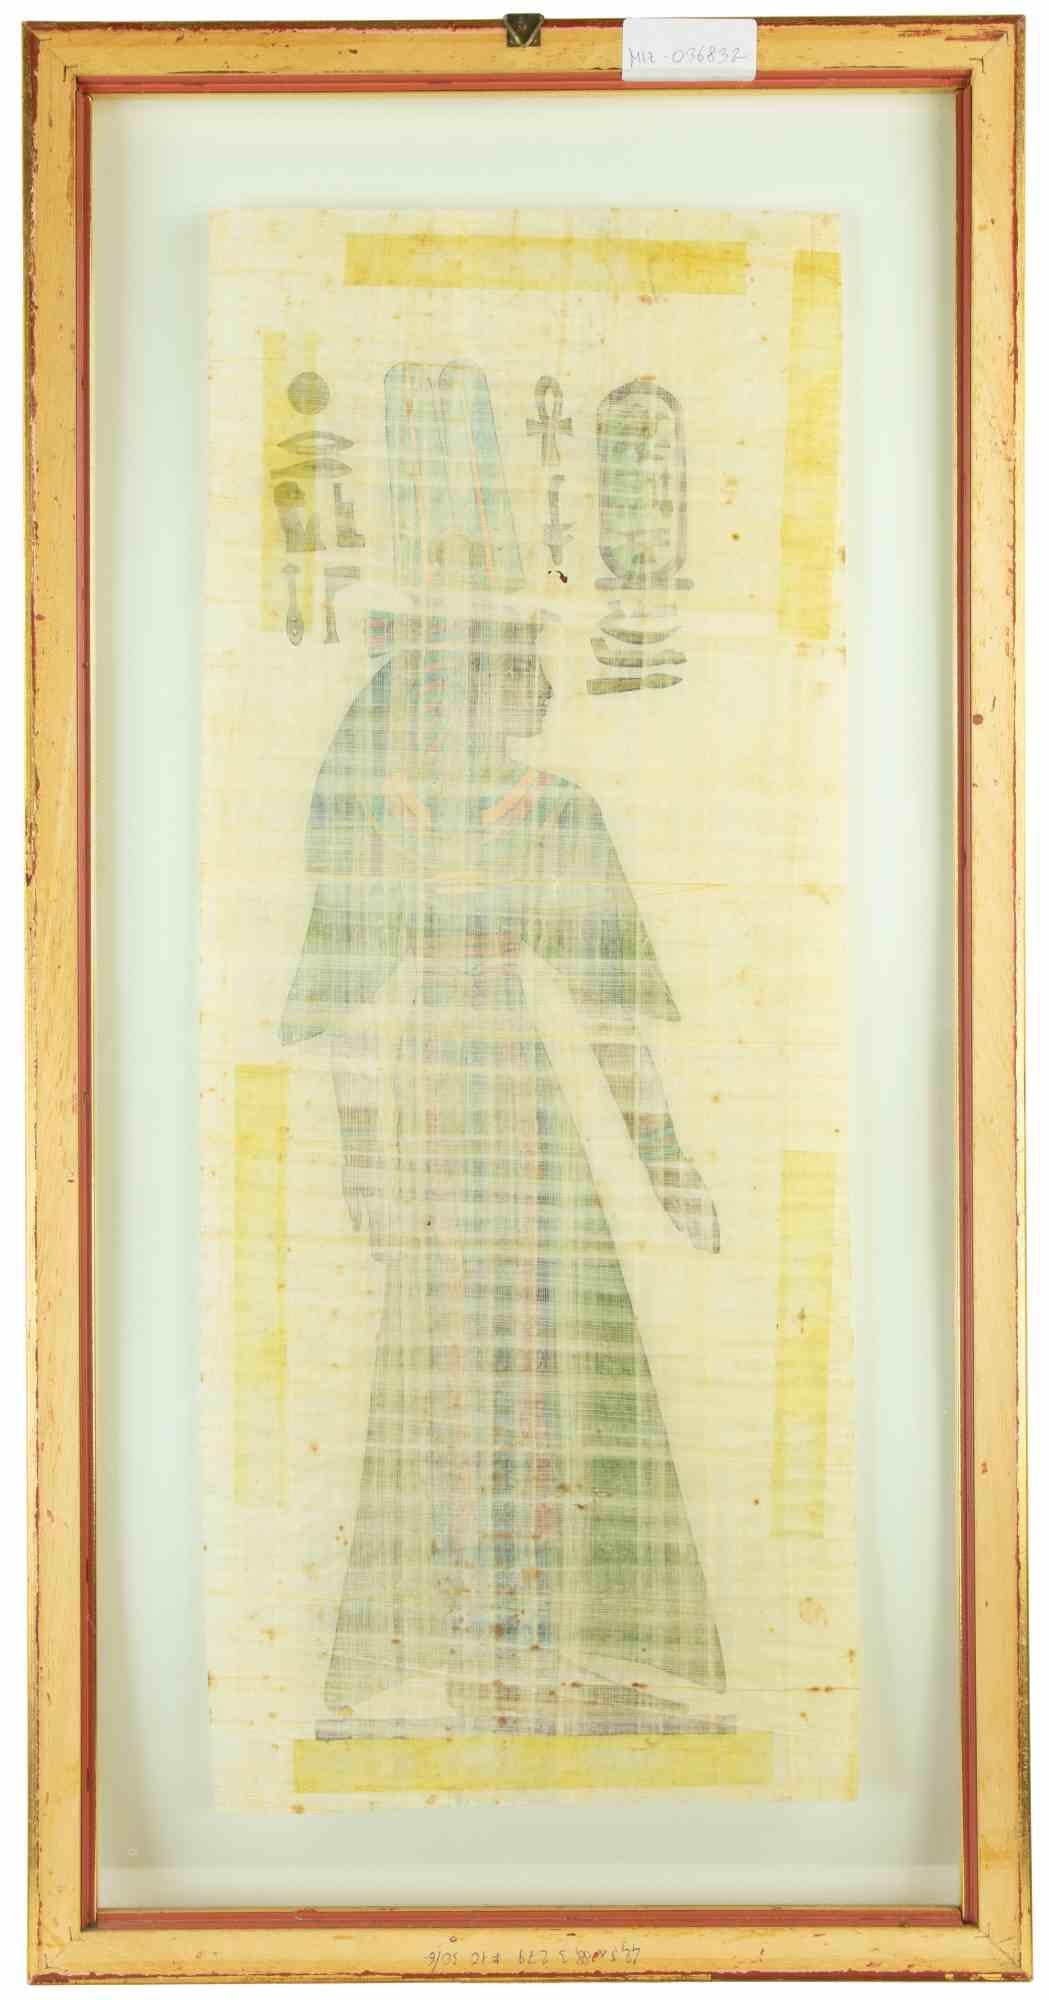 Egyptian Queen - Drawing - 1950s - Modern Art by Unknown